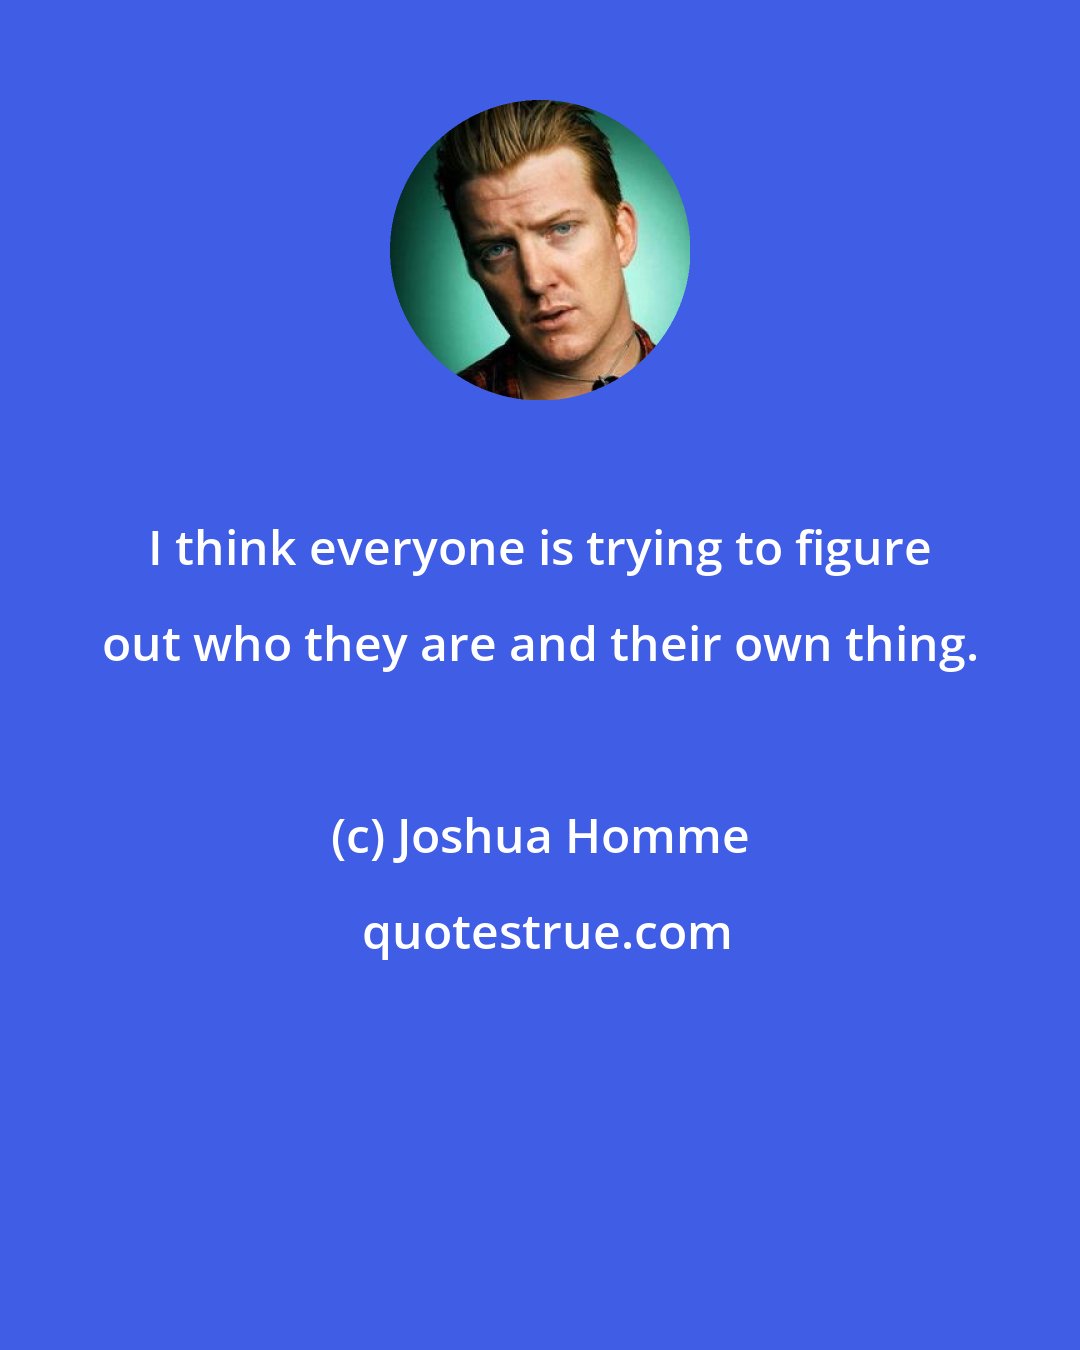 Joshua Homme: I think everyone is trying to figure out who they are and their own thing.